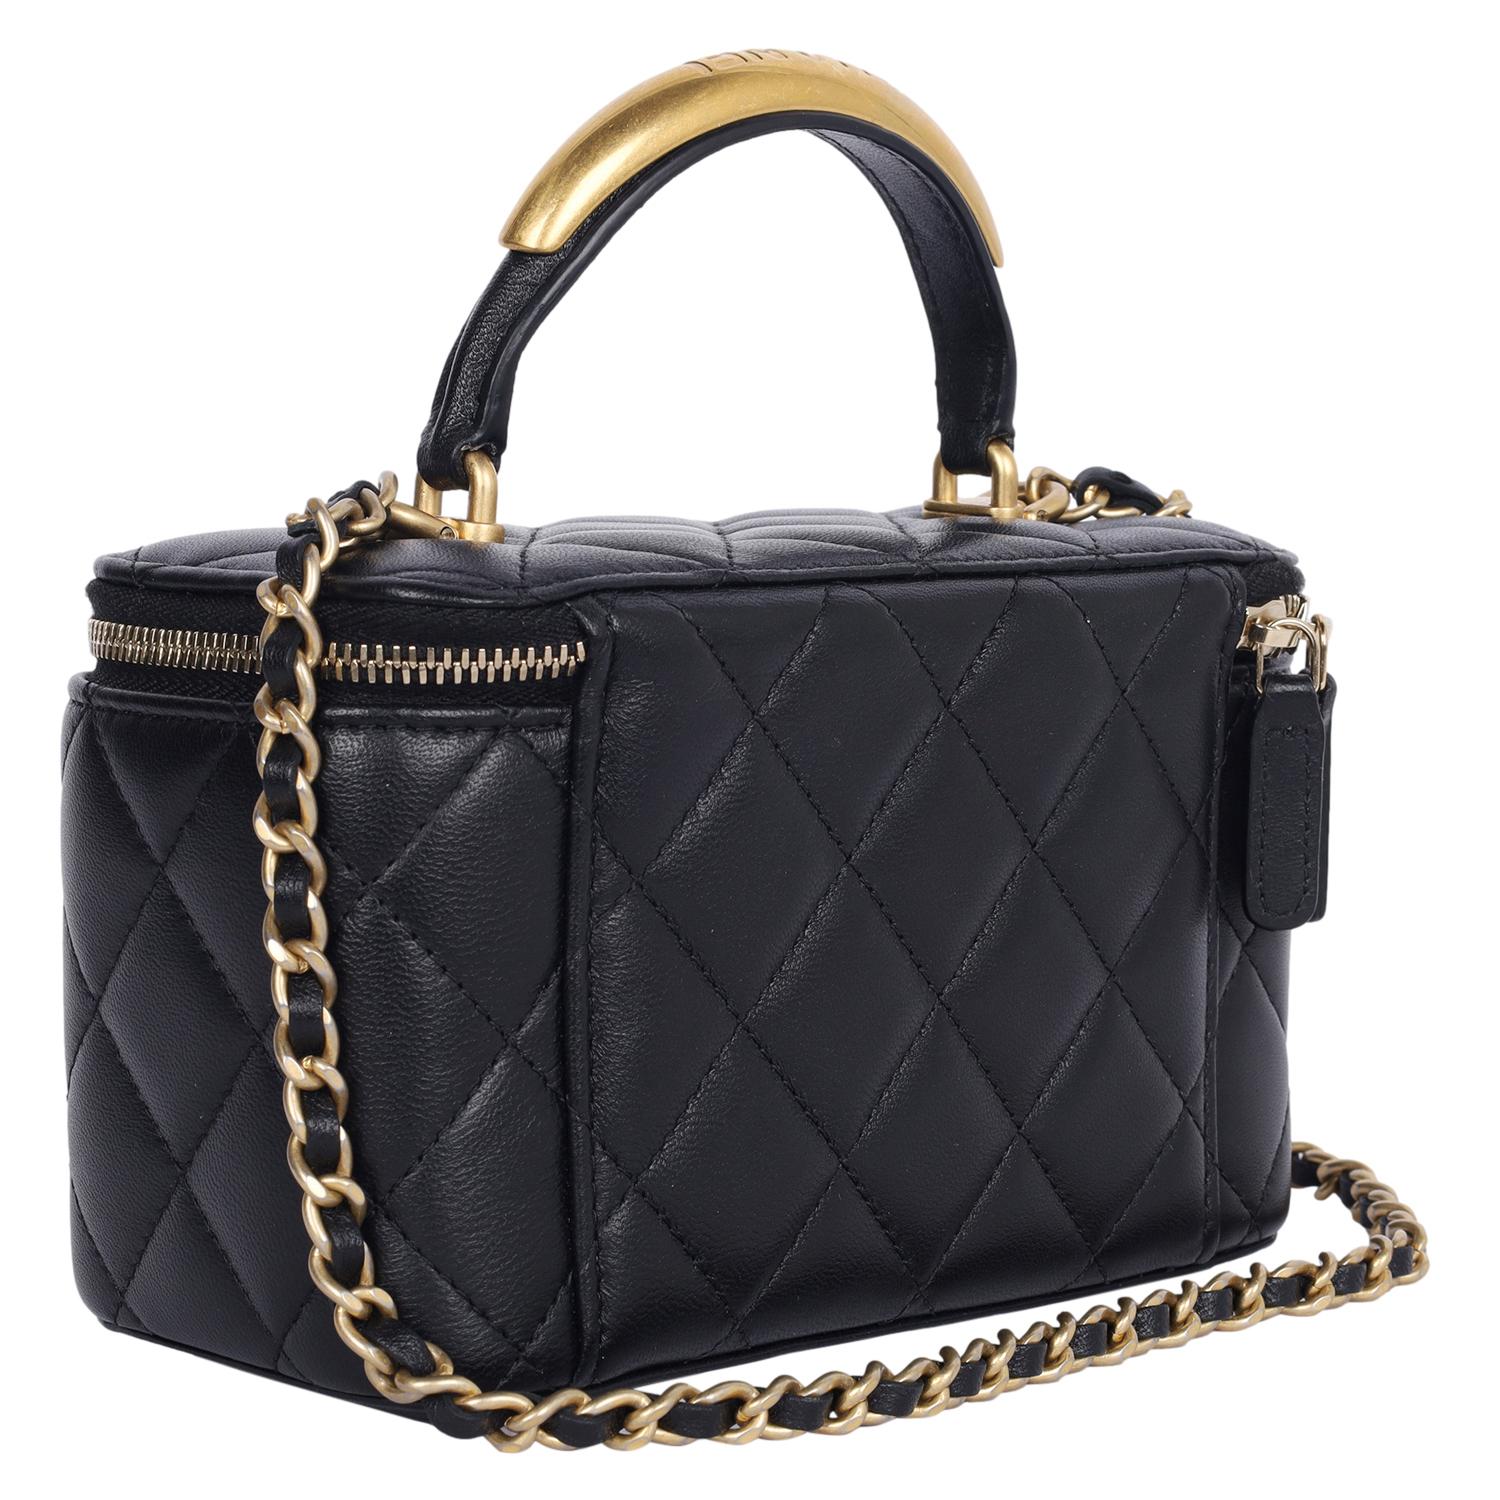 Chanel Lambskin Quilted Small Top Handle Vanity Case Black Crossbody Bag 4